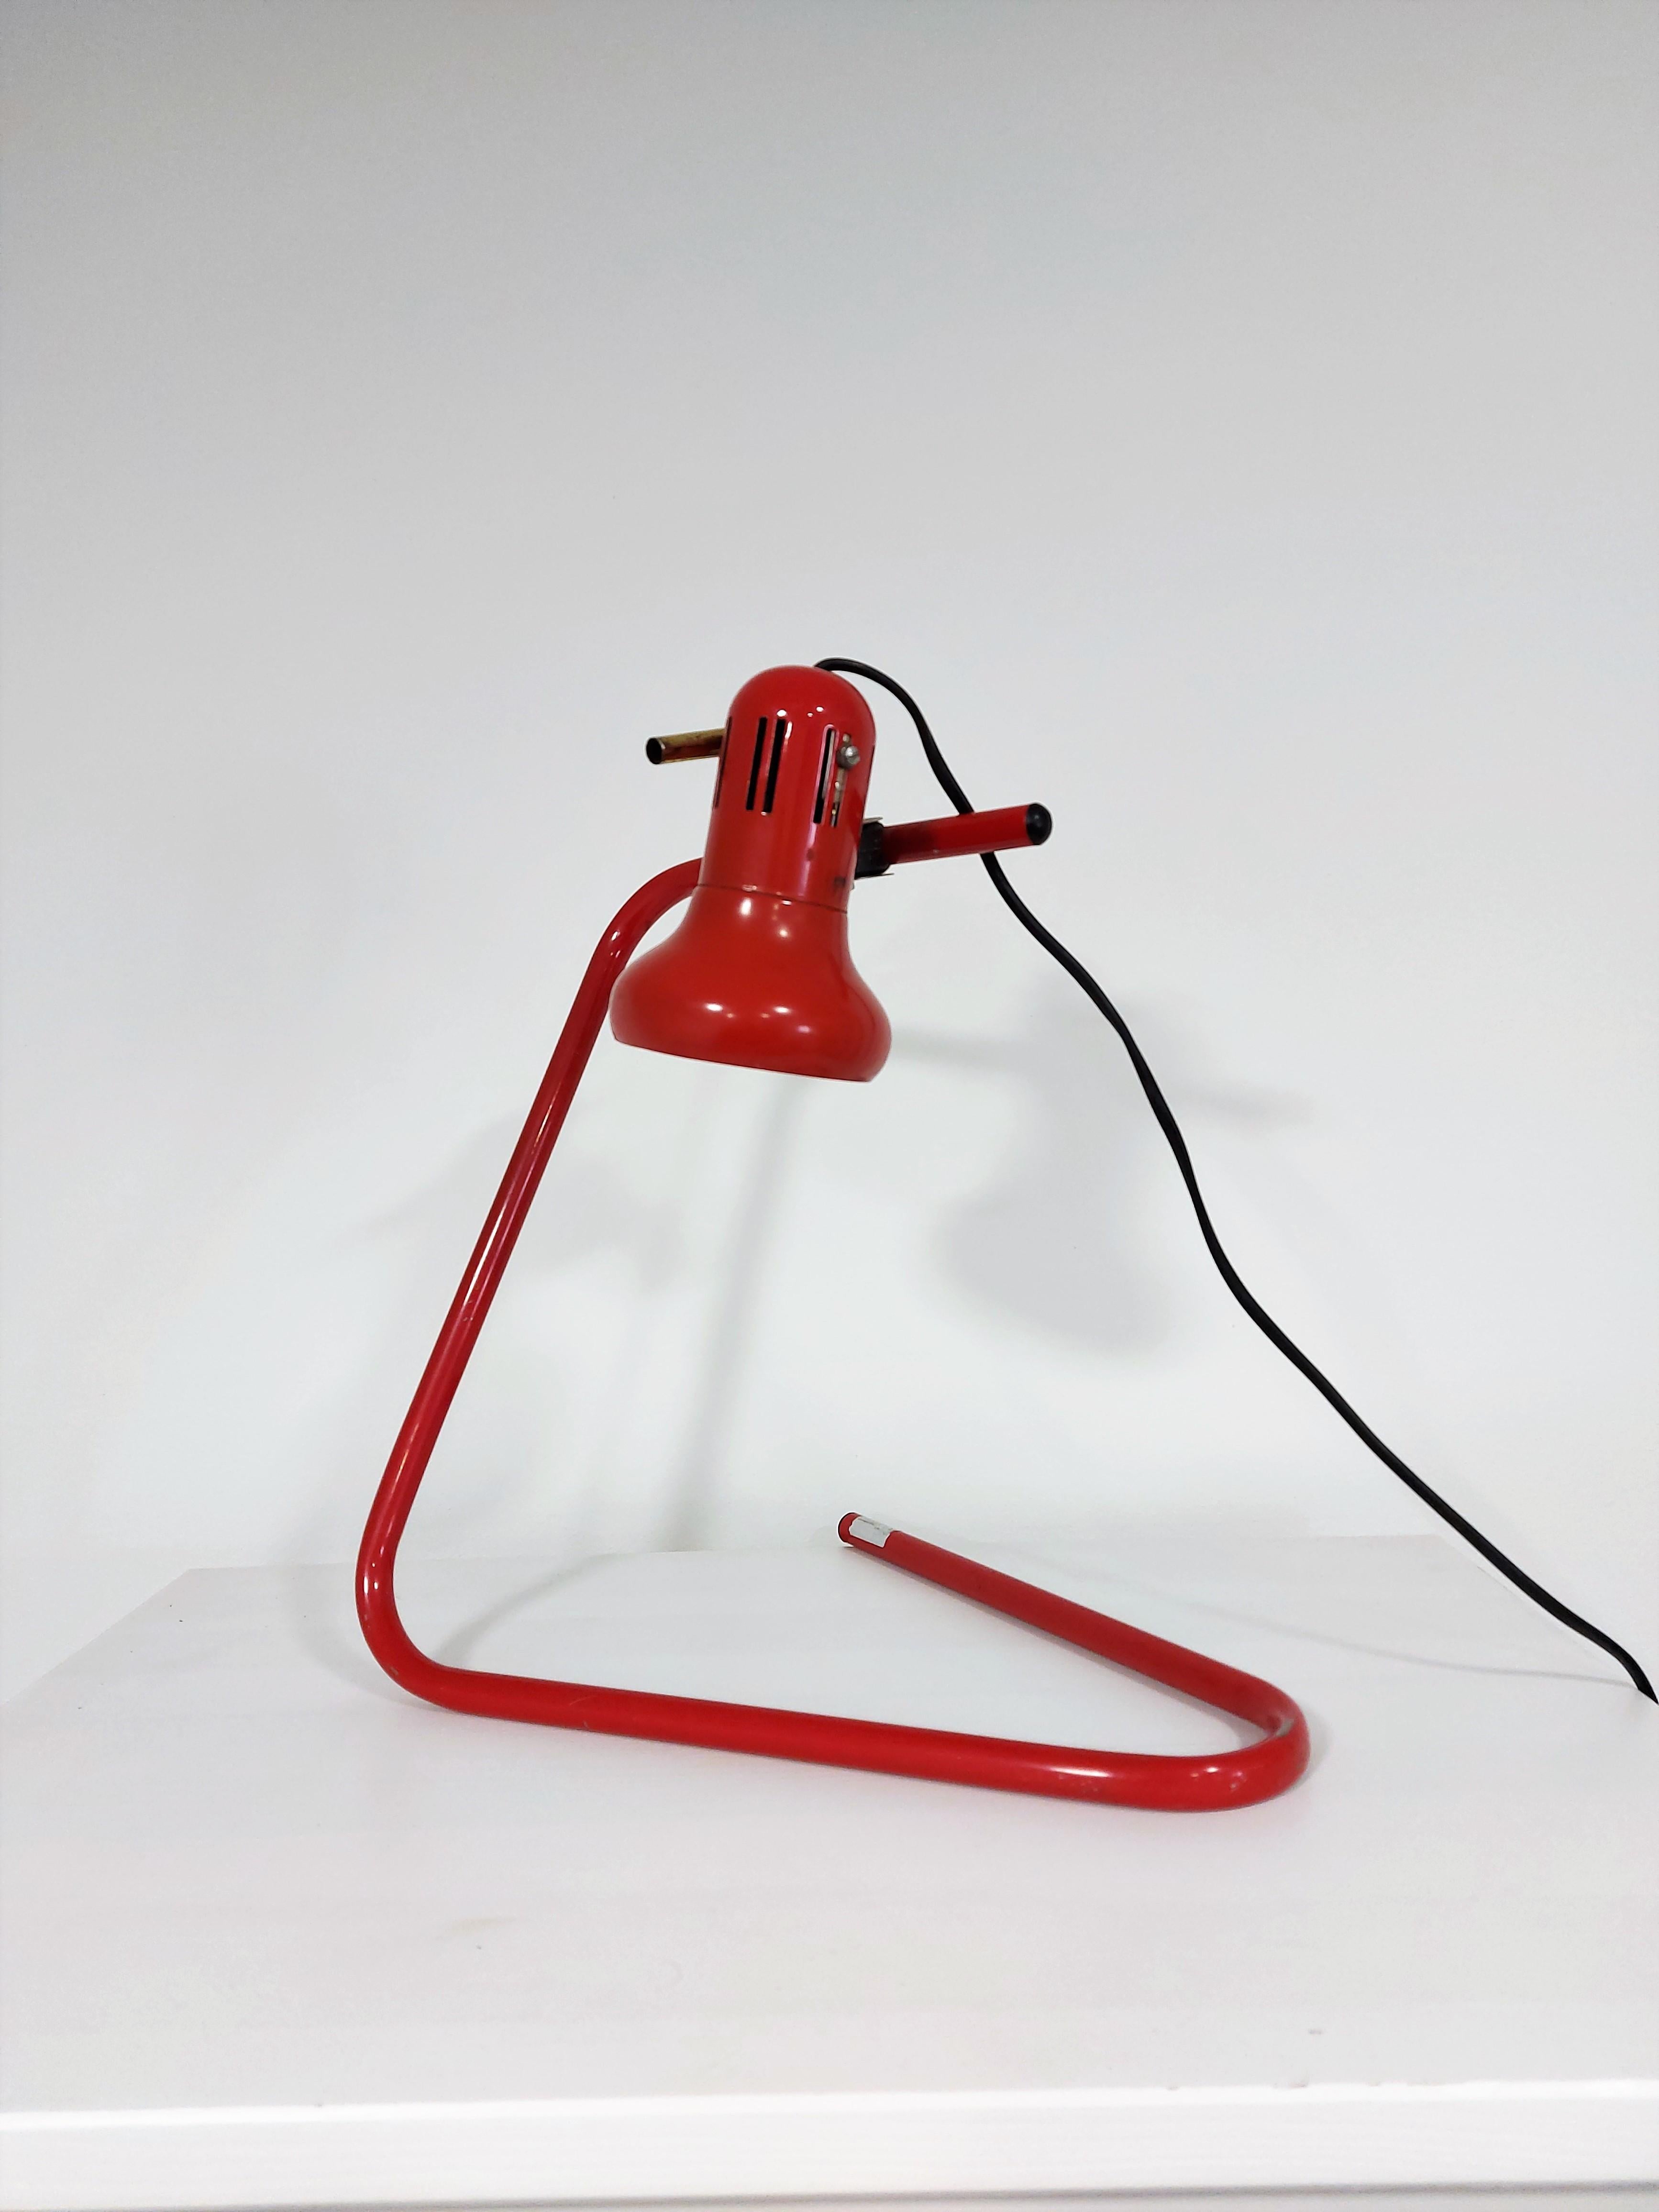 Vintage table lamp

Colour: Red

Material: Metal

Period: 1980s

Style: Midcentury.